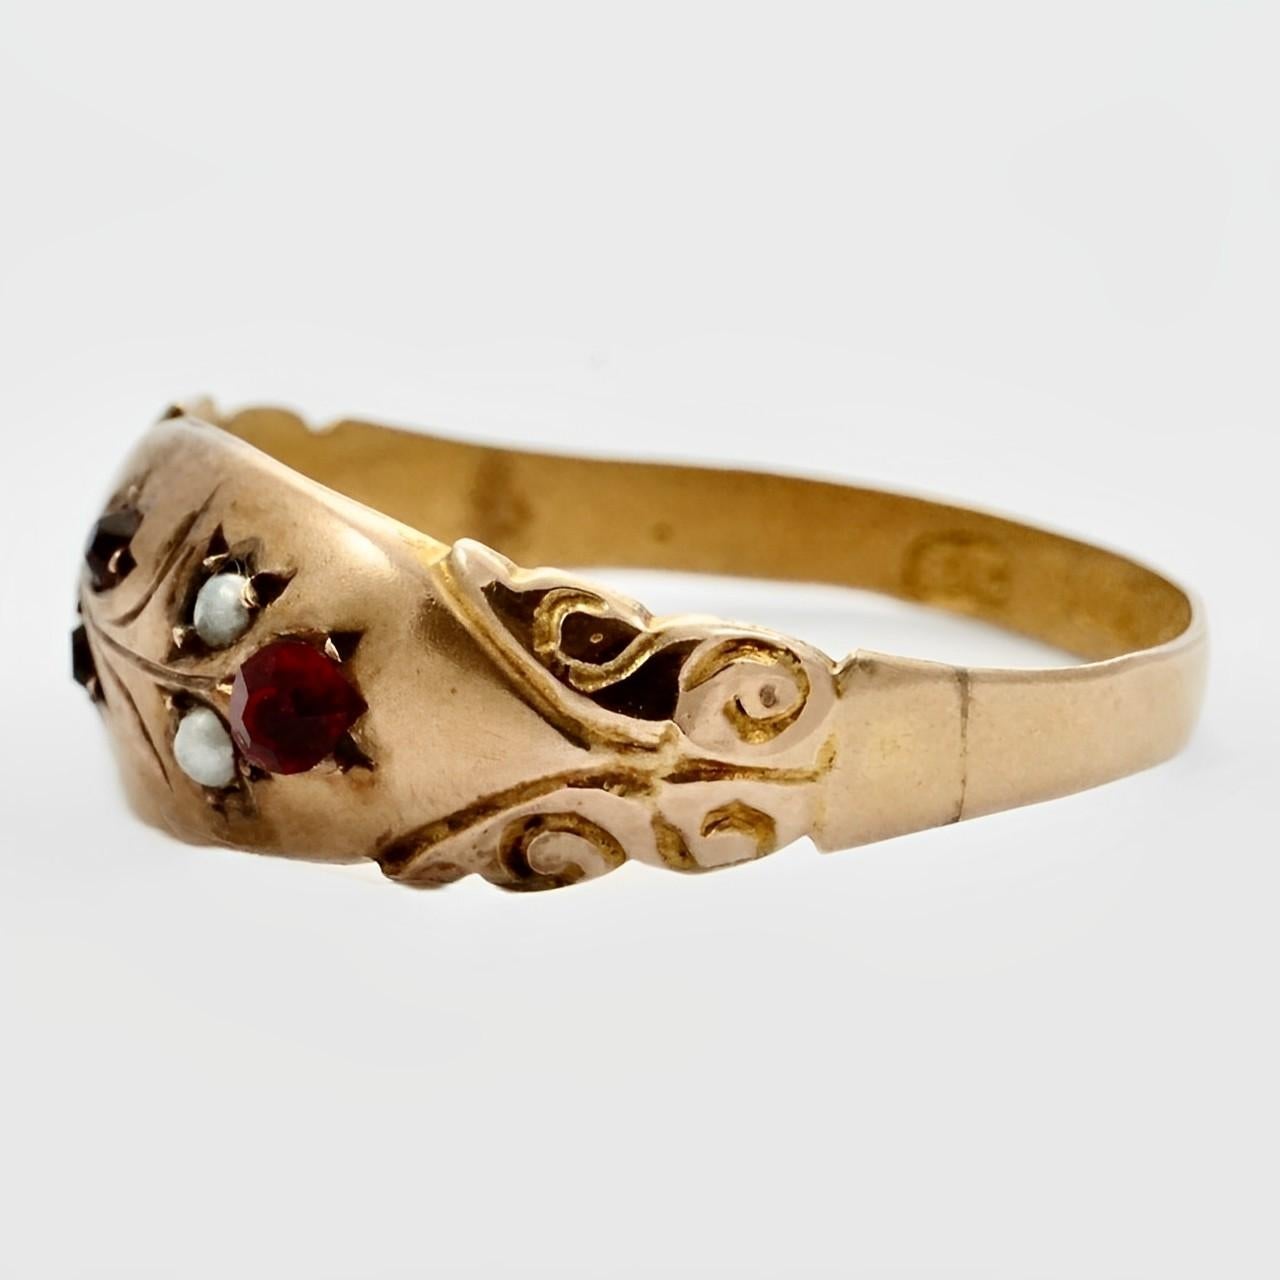 Beautiful antique 9K rose gold hand engraved flower ring, with red stones and faux seed pearls. The larger red stone is a replacement paste stone, the two small red stones are probably rubies or garnets.

The ring has English hallmarks for 9K gold,